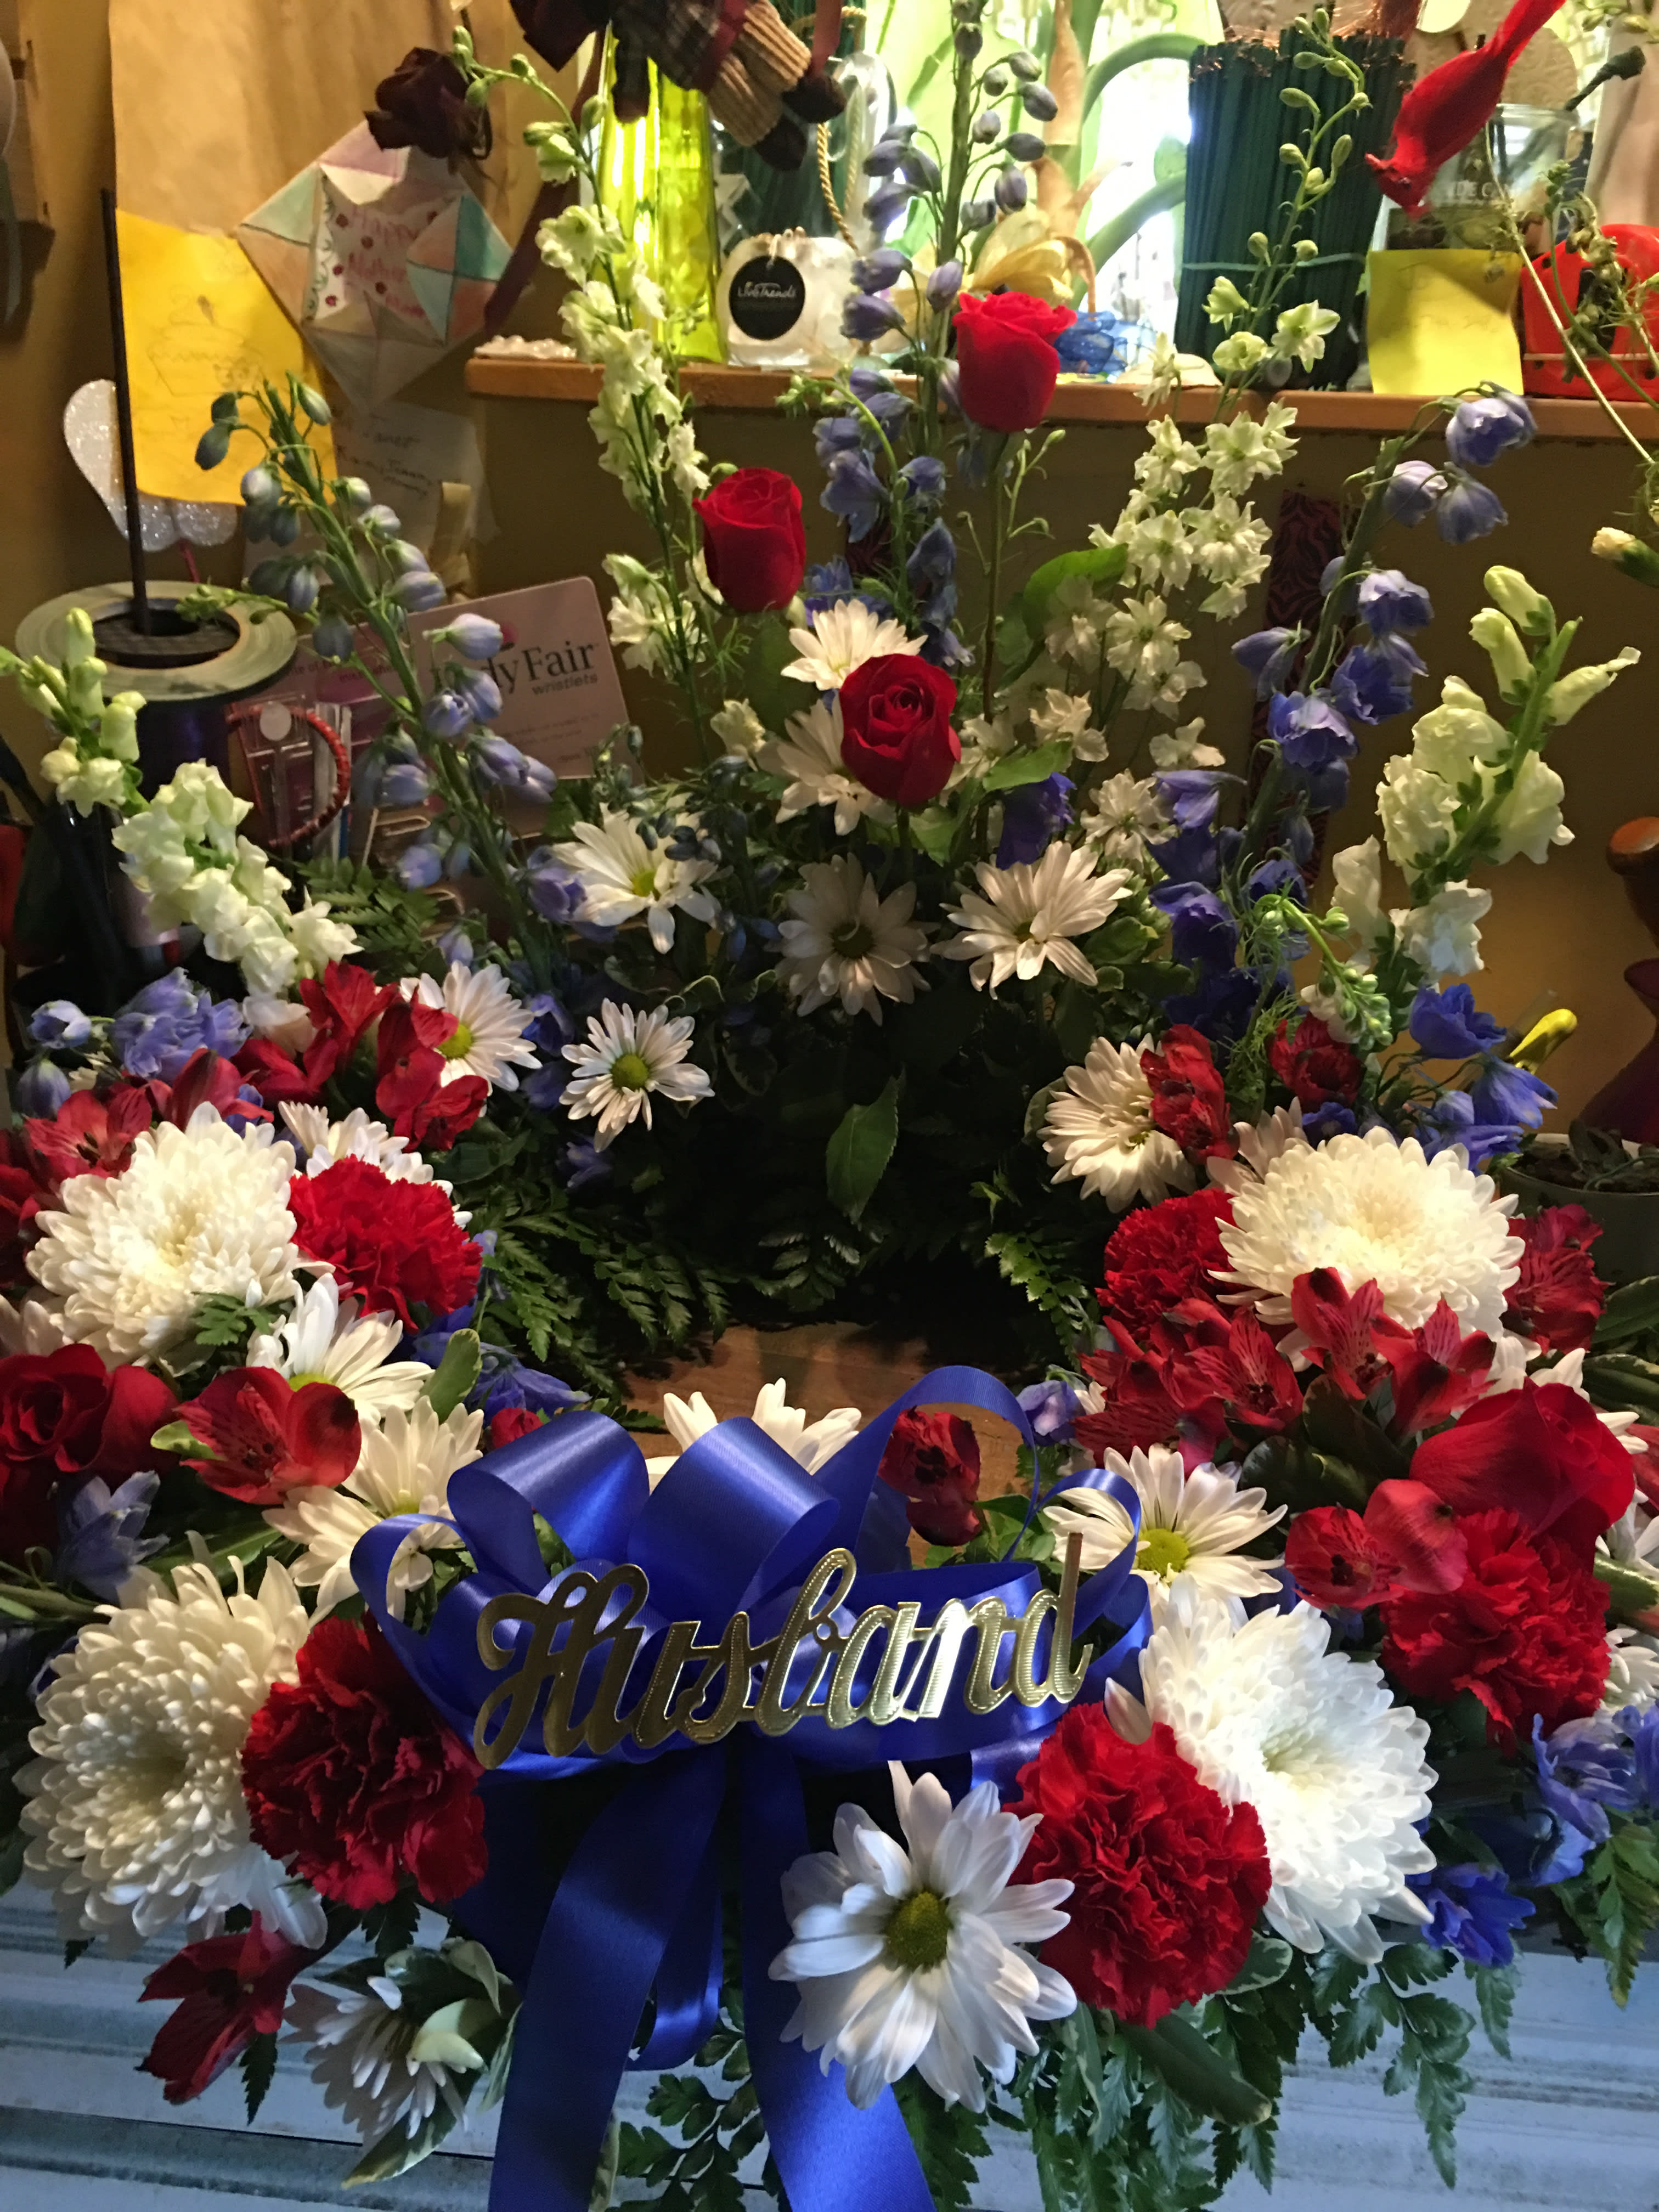 Honor and Glory Funeral - A classic all-American display of patriotic red, white and blue flowers wreath are made to surround the urn and pay tribute to the memory of one who proudly served his country,